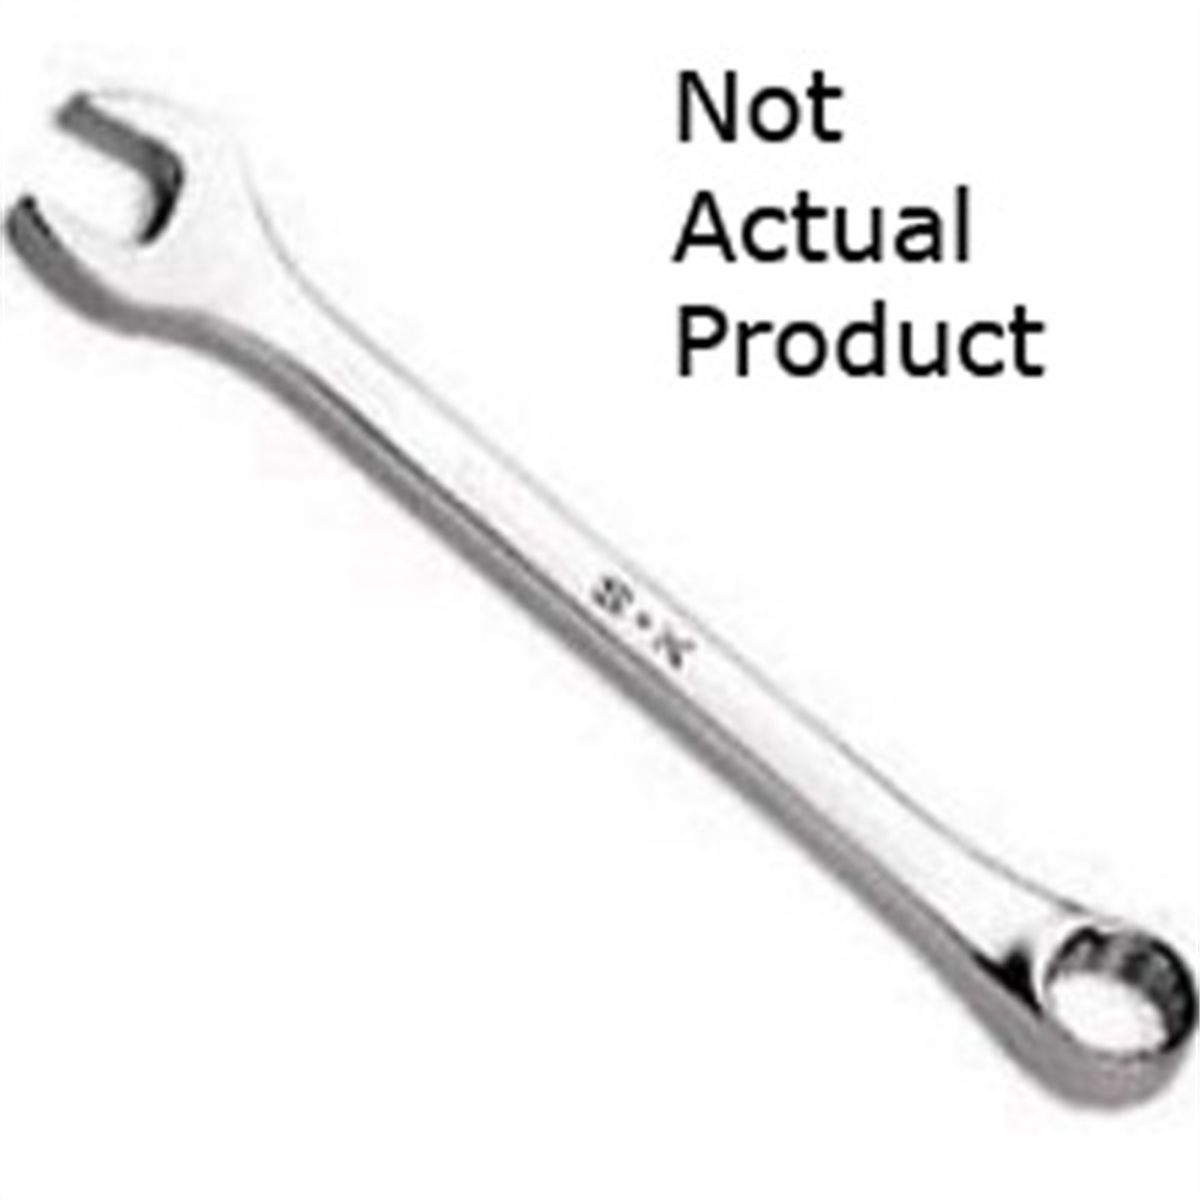 12 Point SuperKrome(R) Fractional Combination Wrench - 11/32"